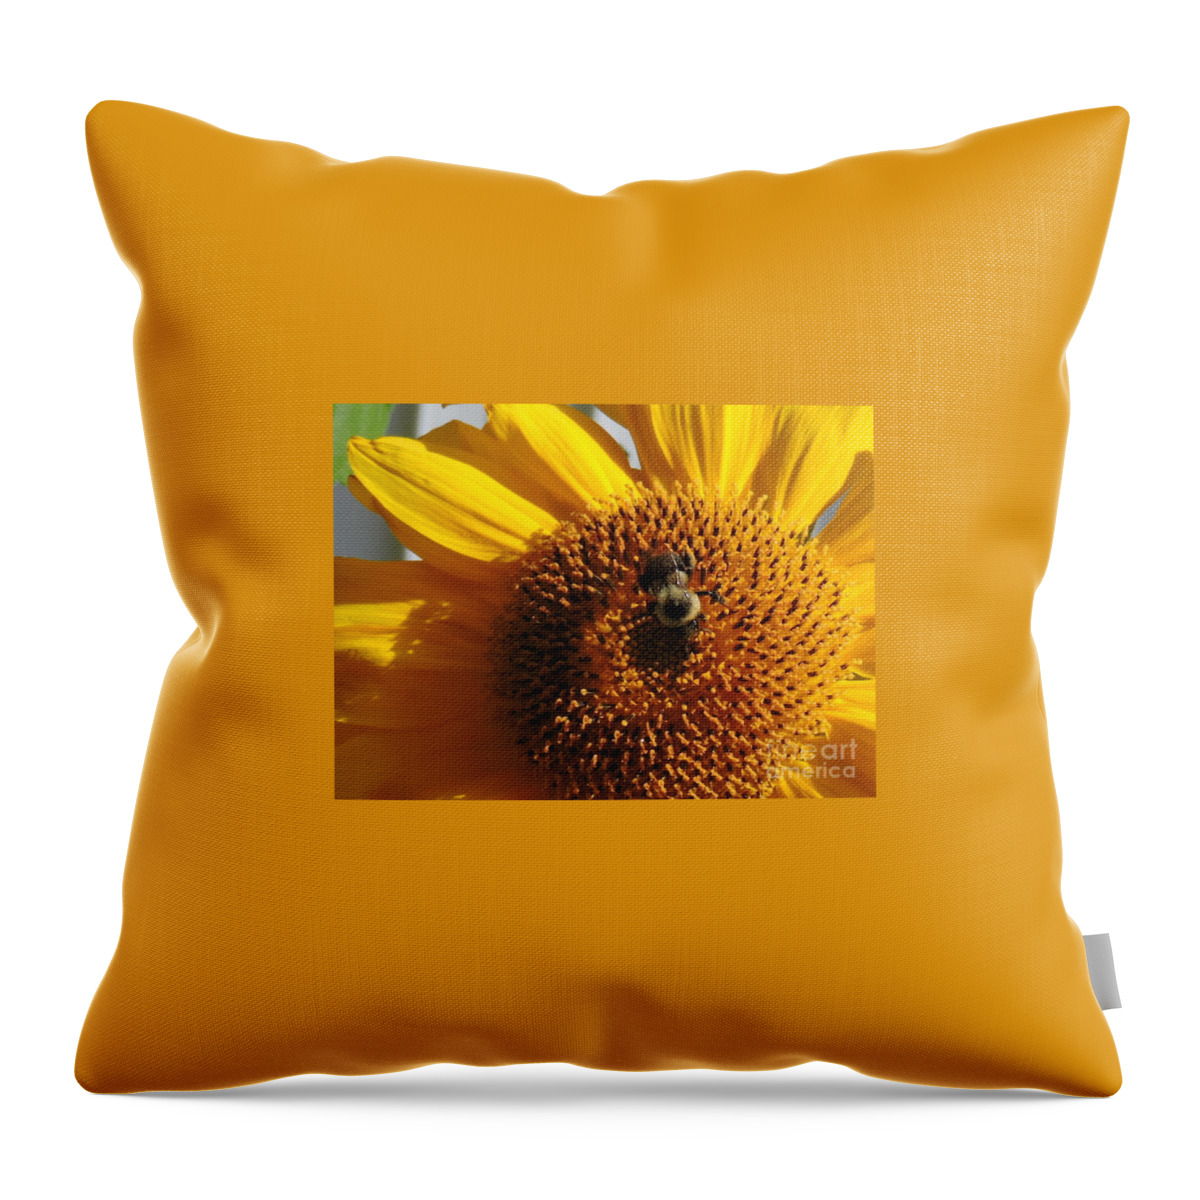  Throw Pillow featuring the photograph Bee In Flower by Michael Wayne Gulliver